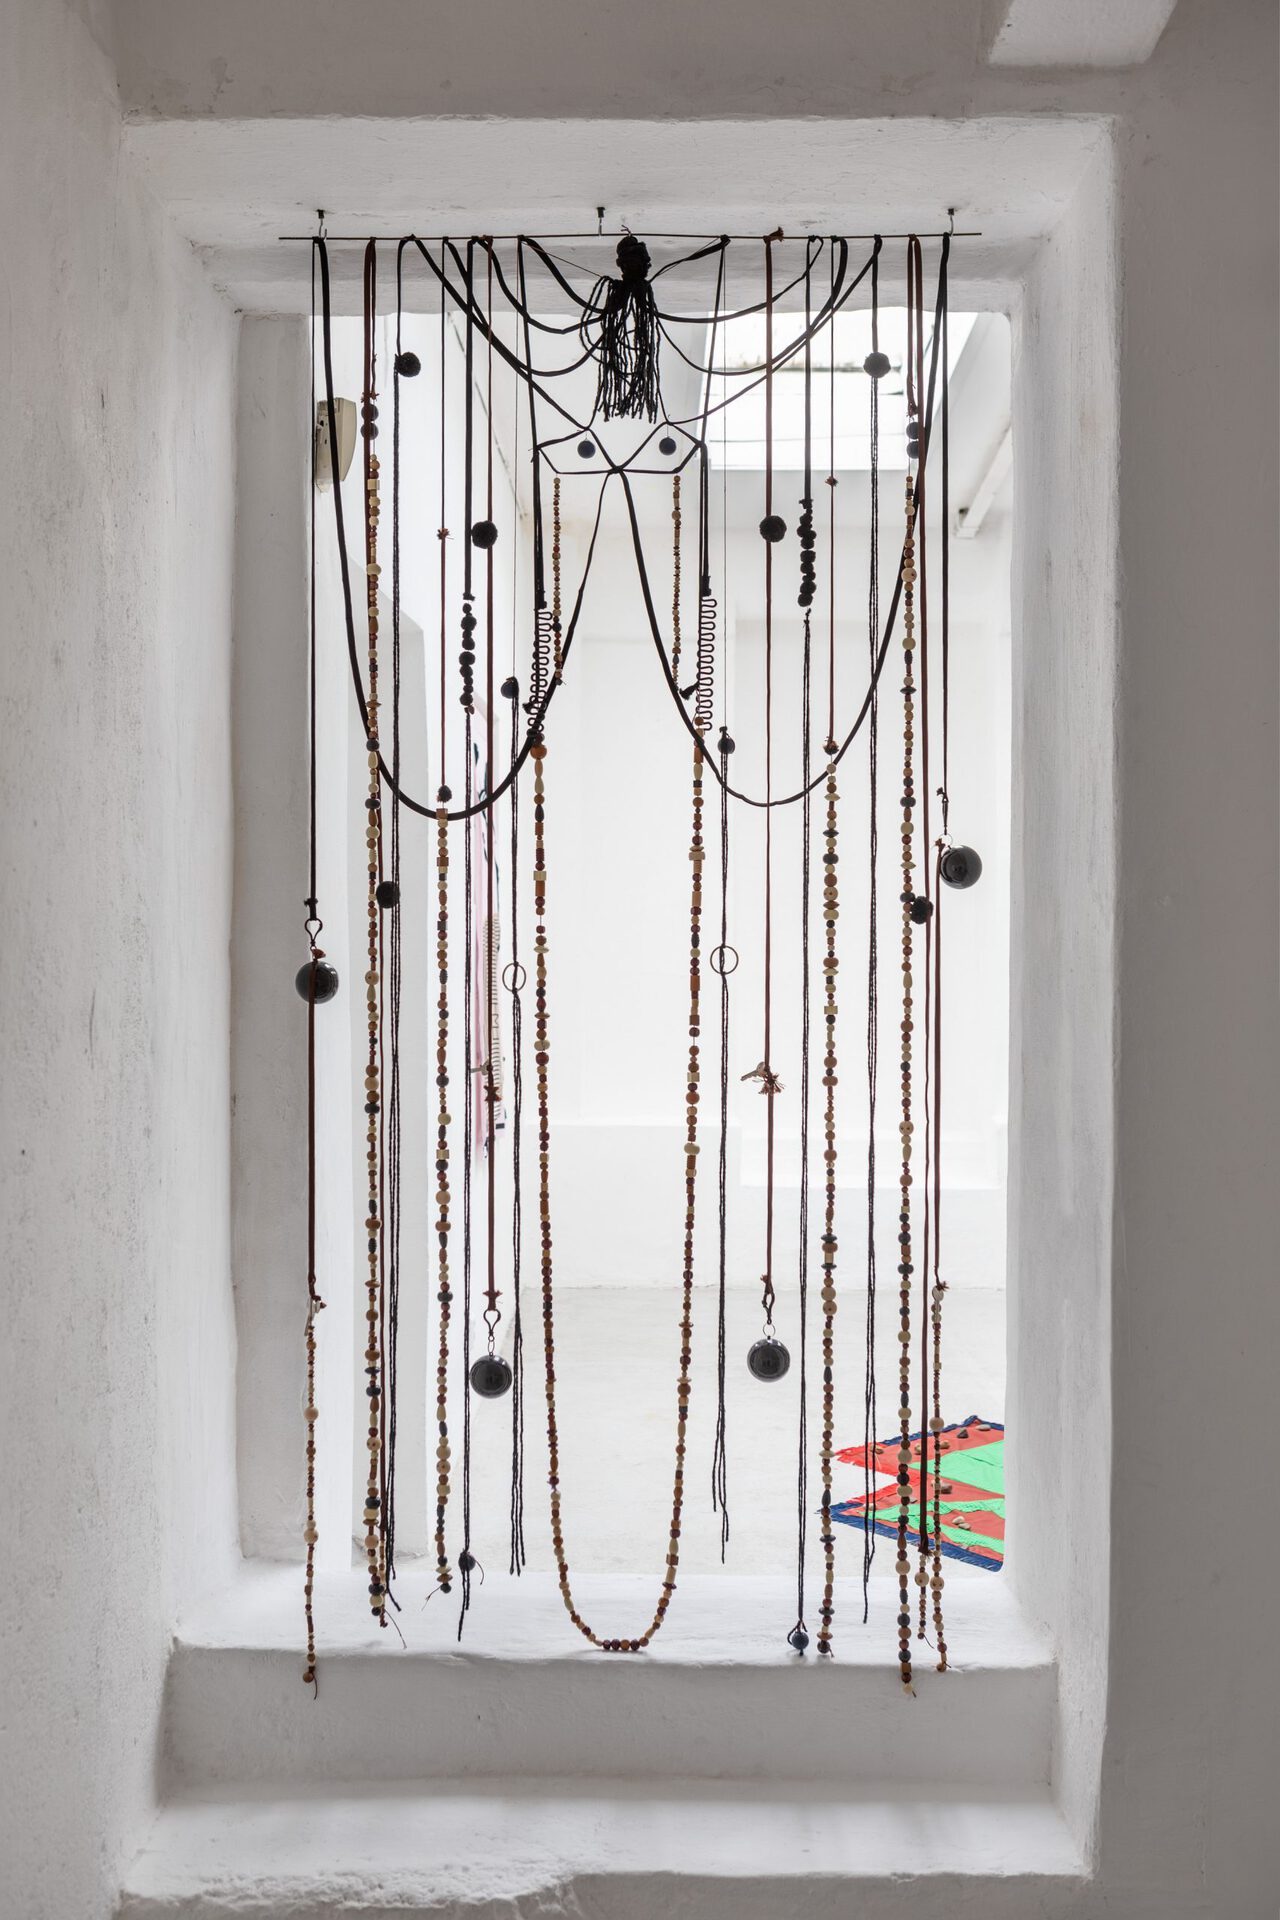 Dropped my Jaw, 2021, metal, wool, beads, shoelaces, plastic balls, plastic, pompoms 205 x 95 cm